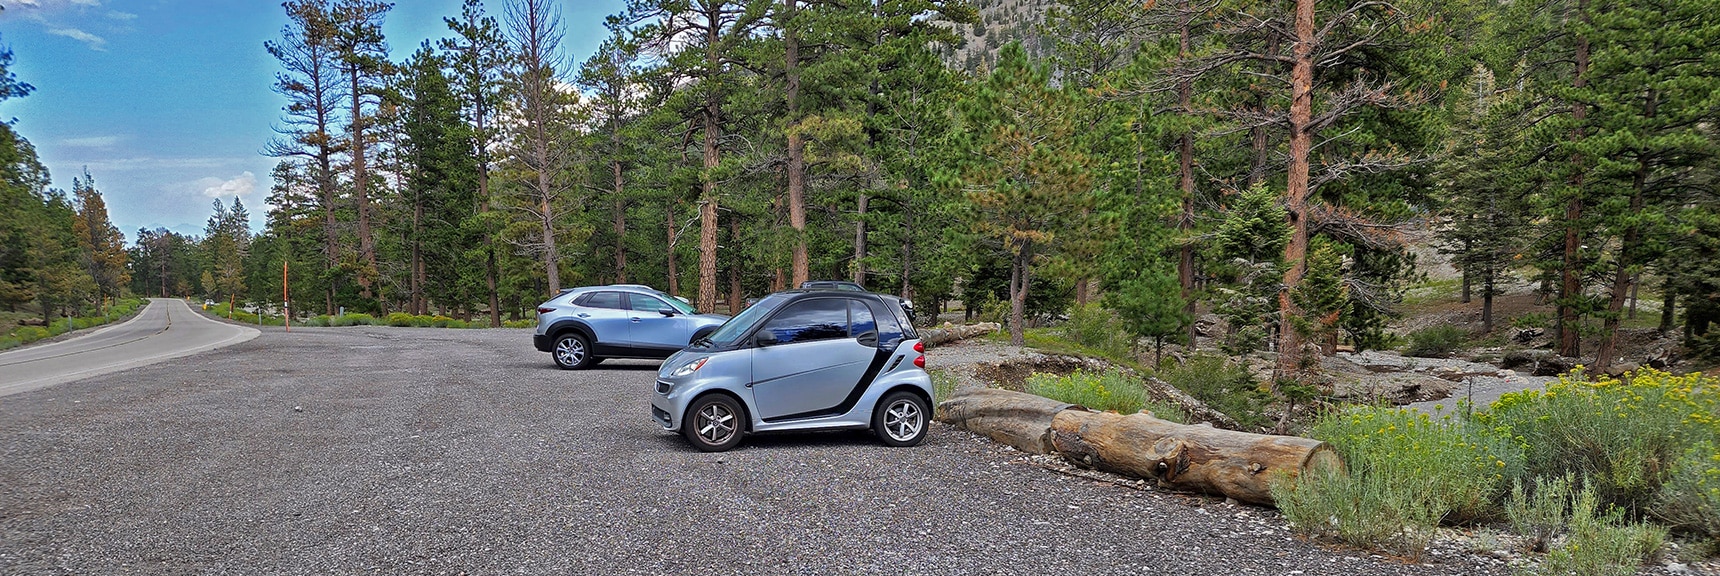 Back at "The Beast" in Parking Area on Lee Canyon Road | Sisters North | Lee Canyon | Mt Charleston Wilderness | Spring Mountains, Nevada